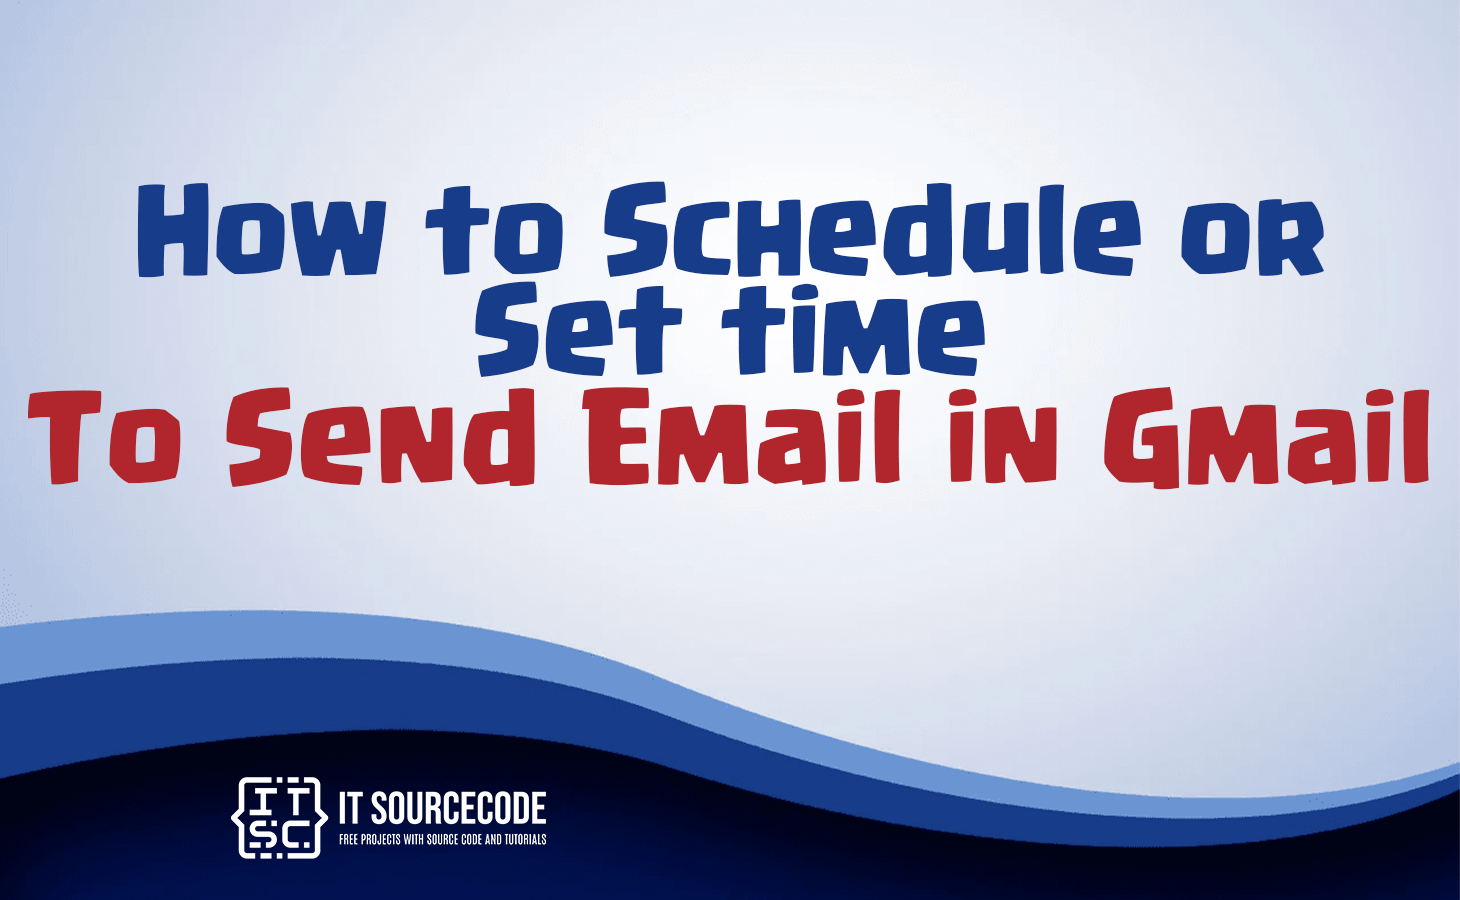 how to schedule or set time to send email in gmail